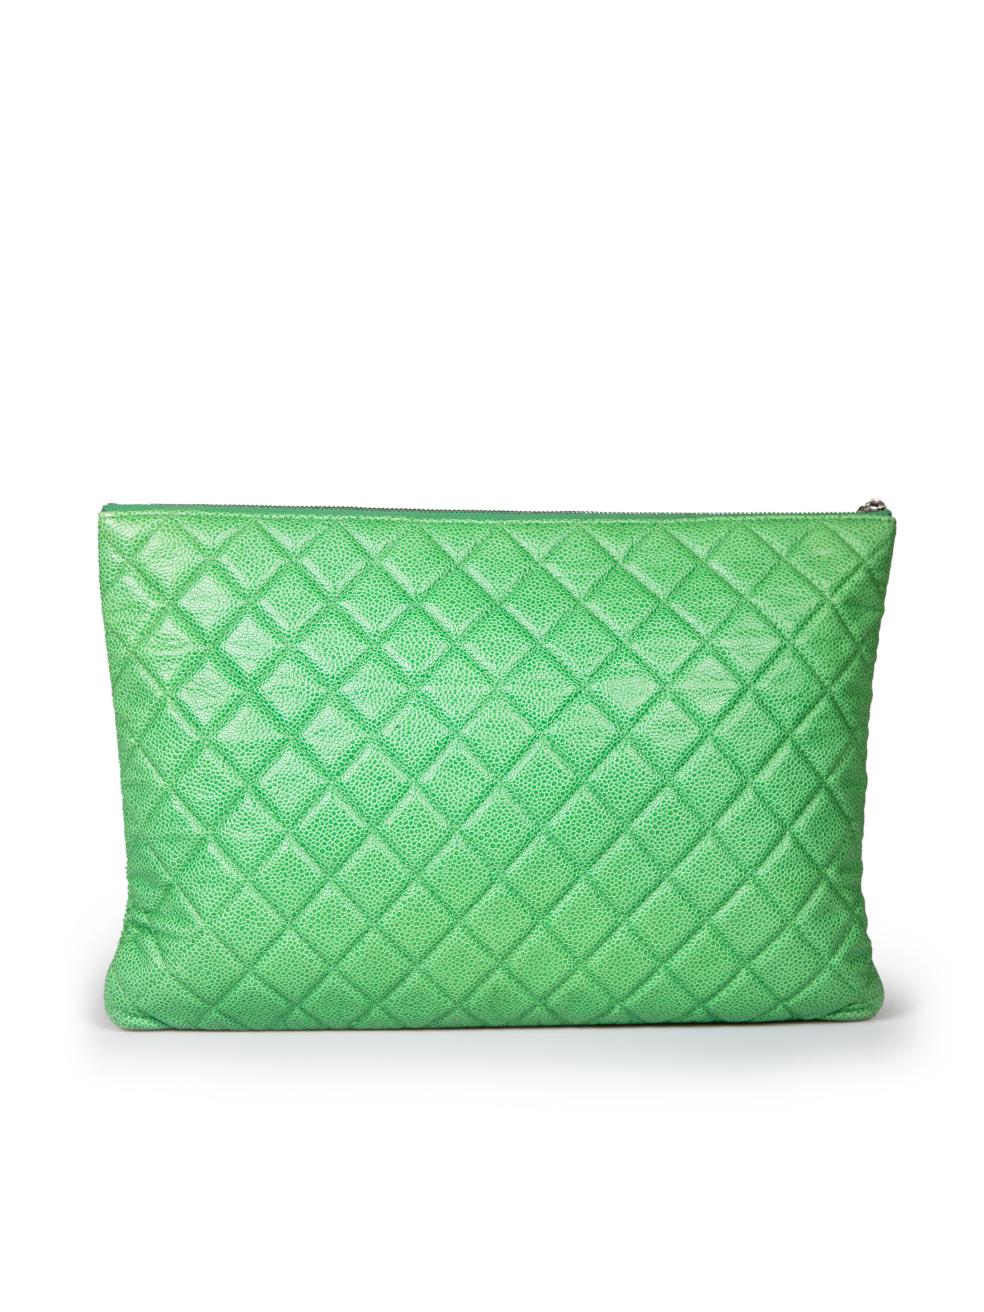 Chanel Green Caviar Leather Quilted Large O-Case Clutch In Good Condition For Sale In London, GB